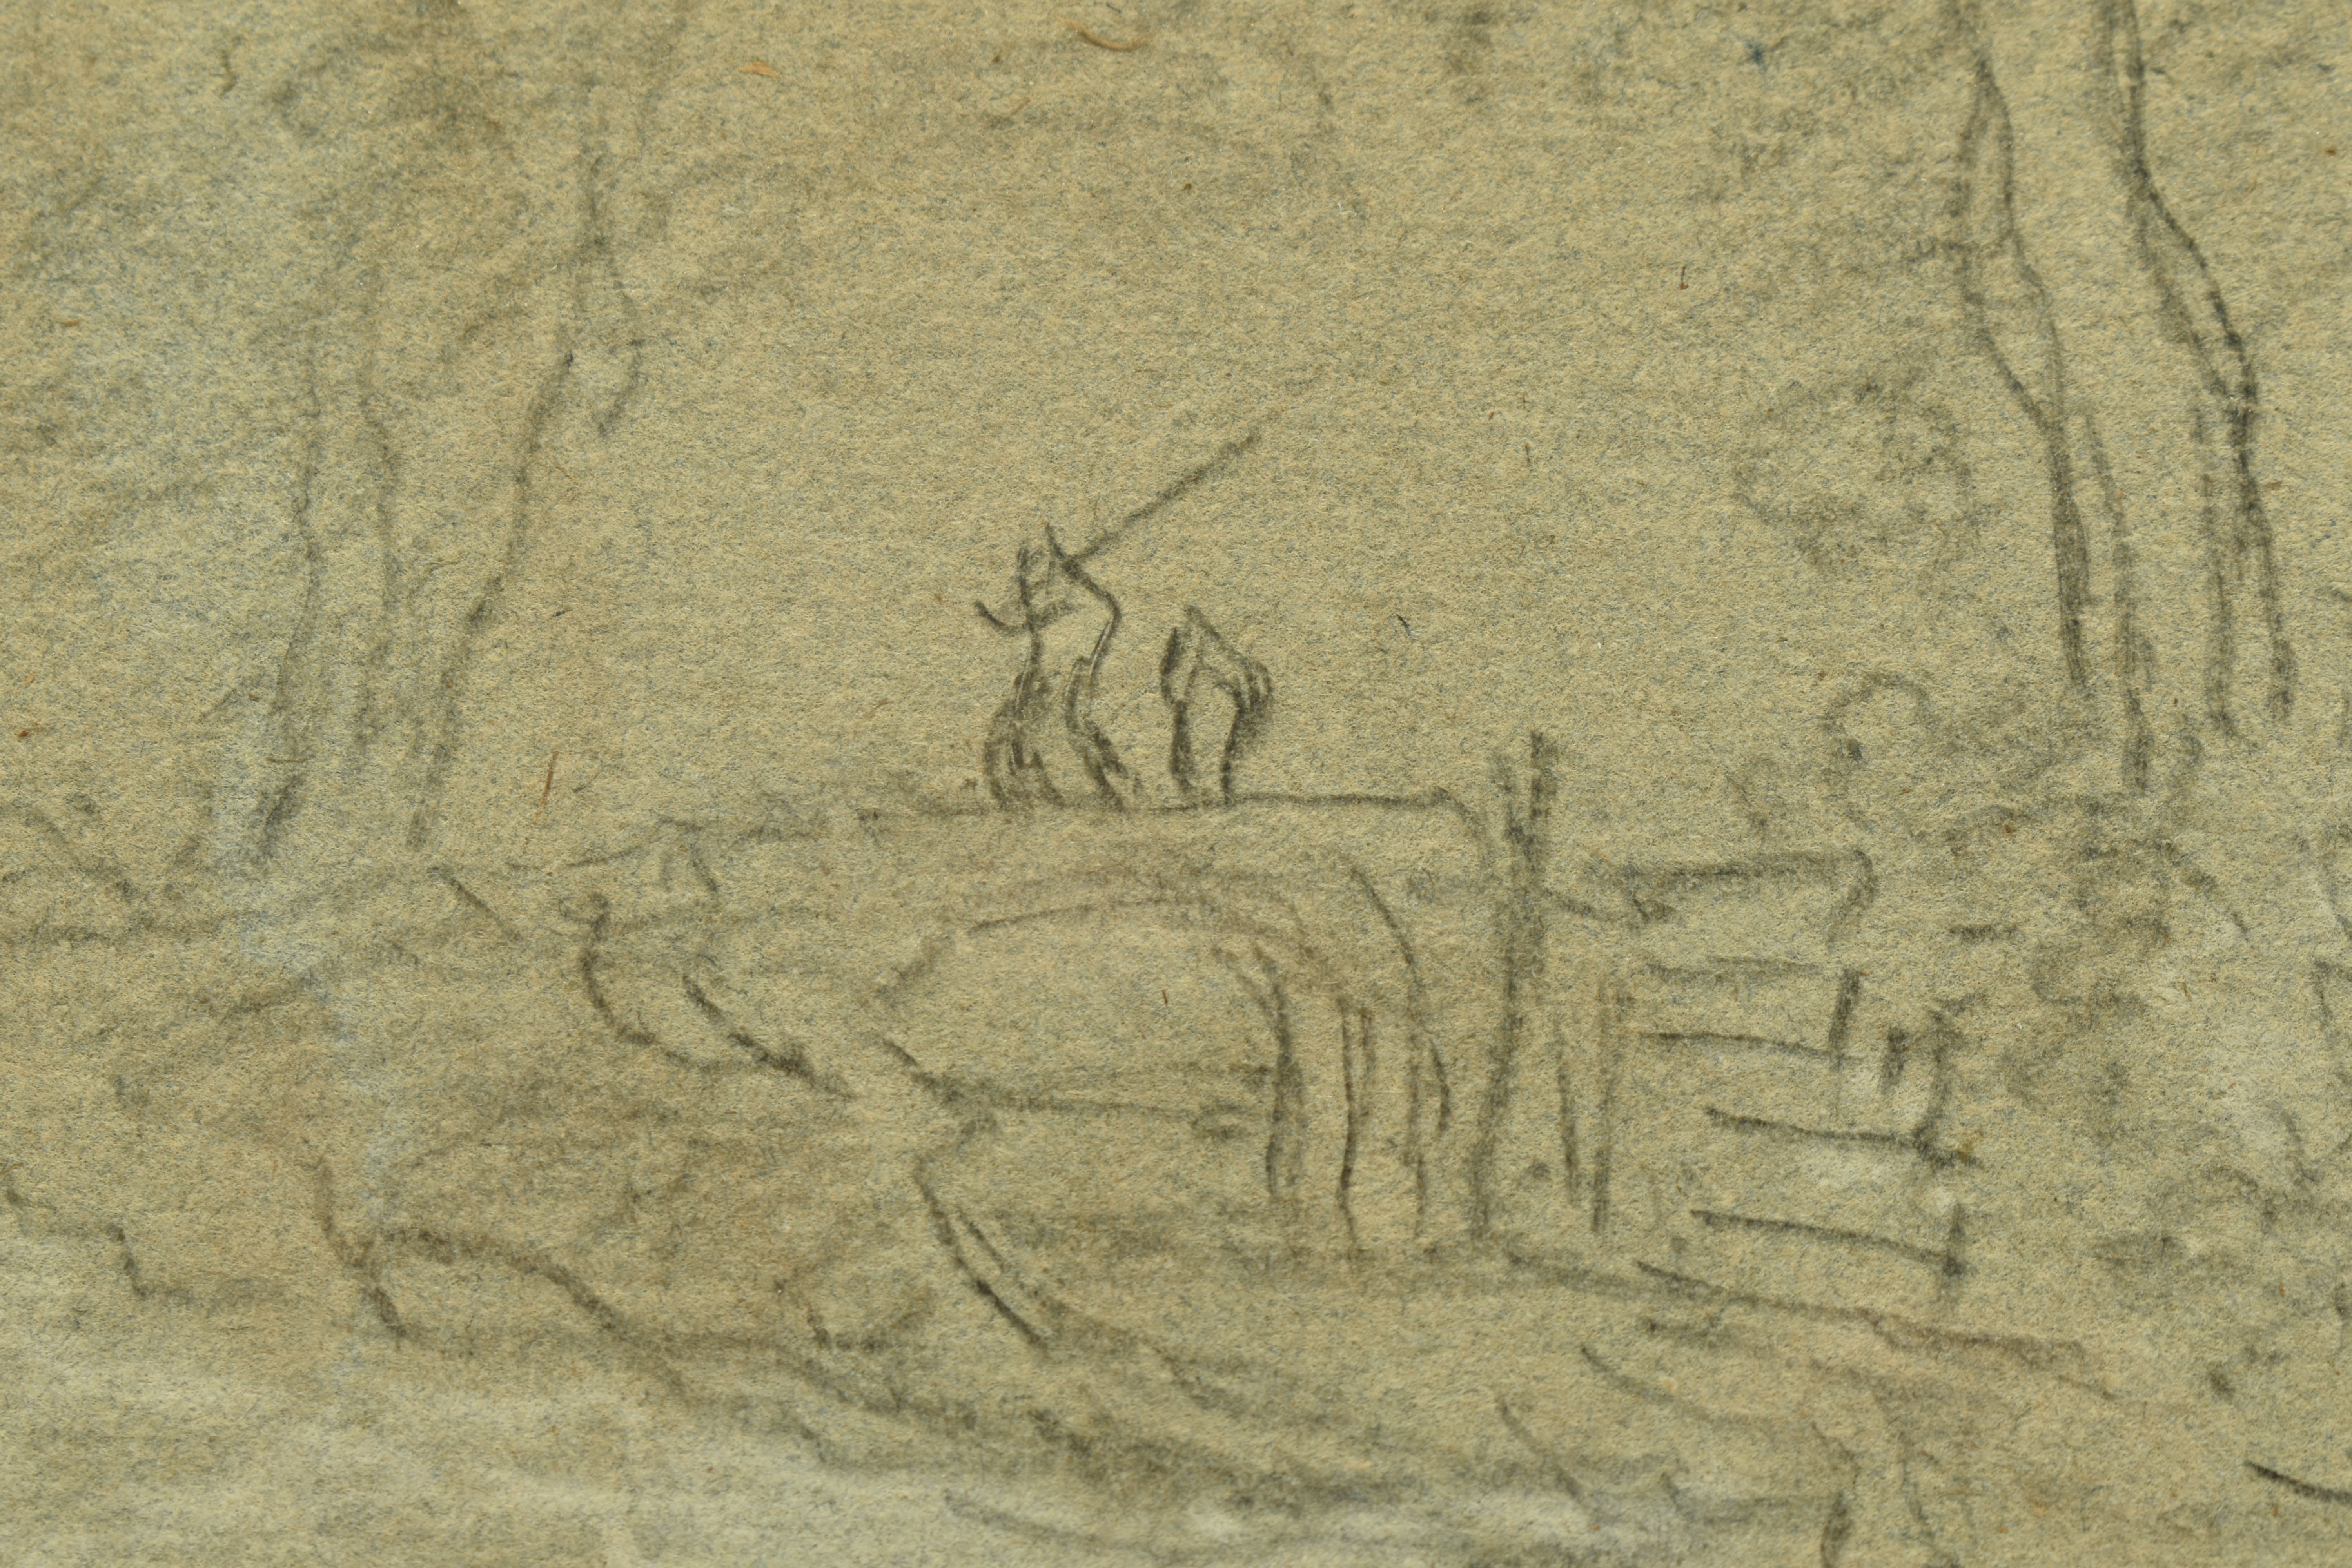 AN 18TH CENTURY ENGLISH SCHOOL LANDSCAPE SKETCH, two figures, one possibly an angler are crossing - Image 4 of 6